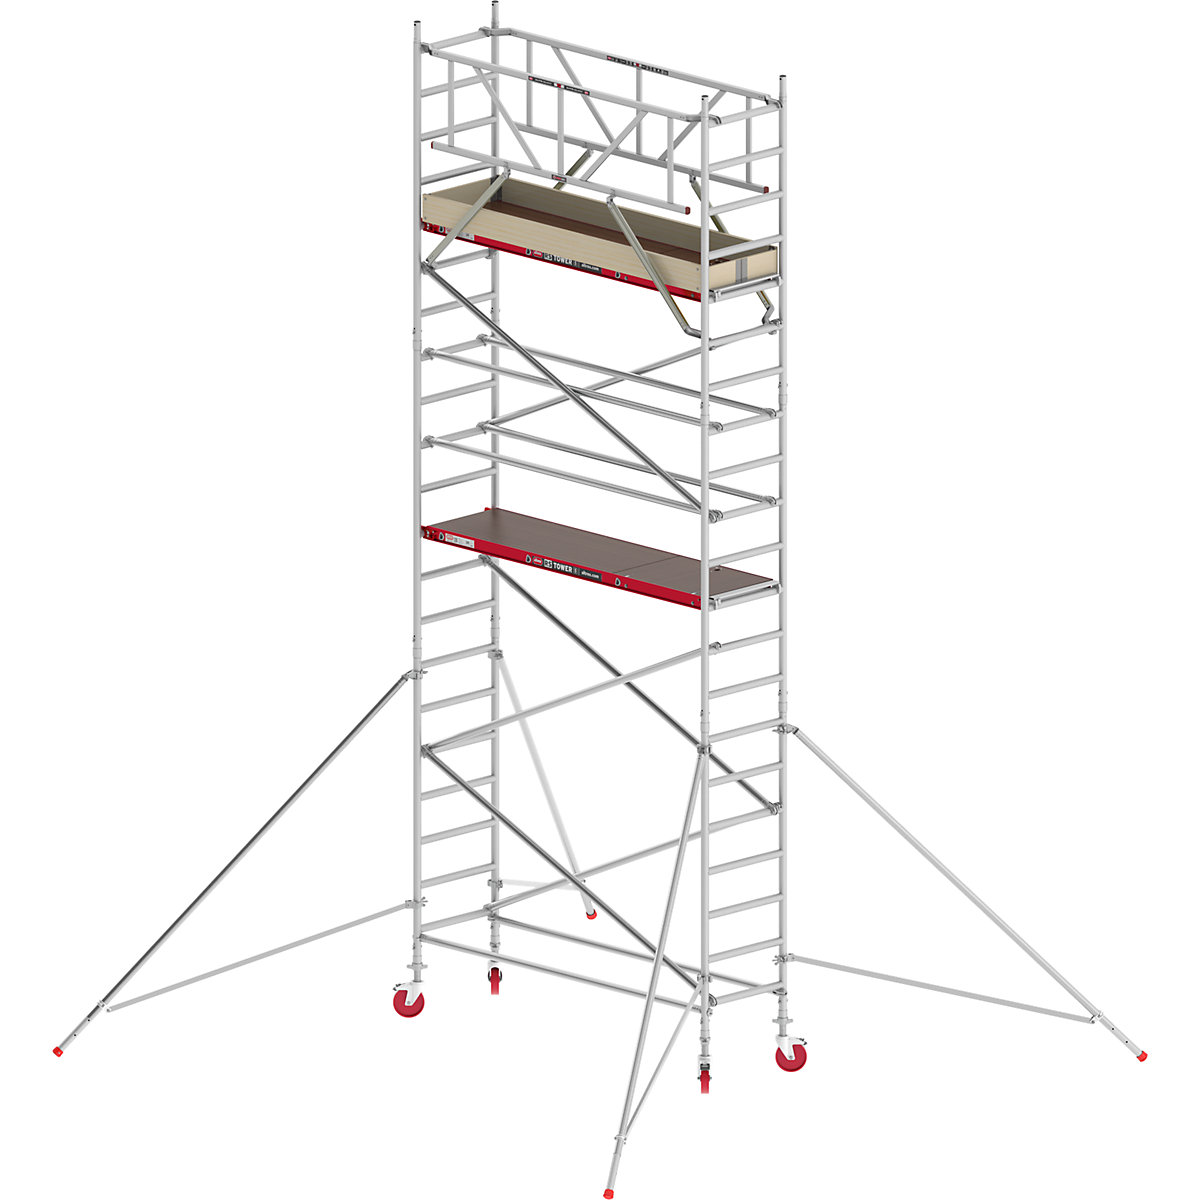 RS TOWER 41 slim mobile access tower – Altrex, wooden platform, length 2.45 m, working height 7.20 m-7